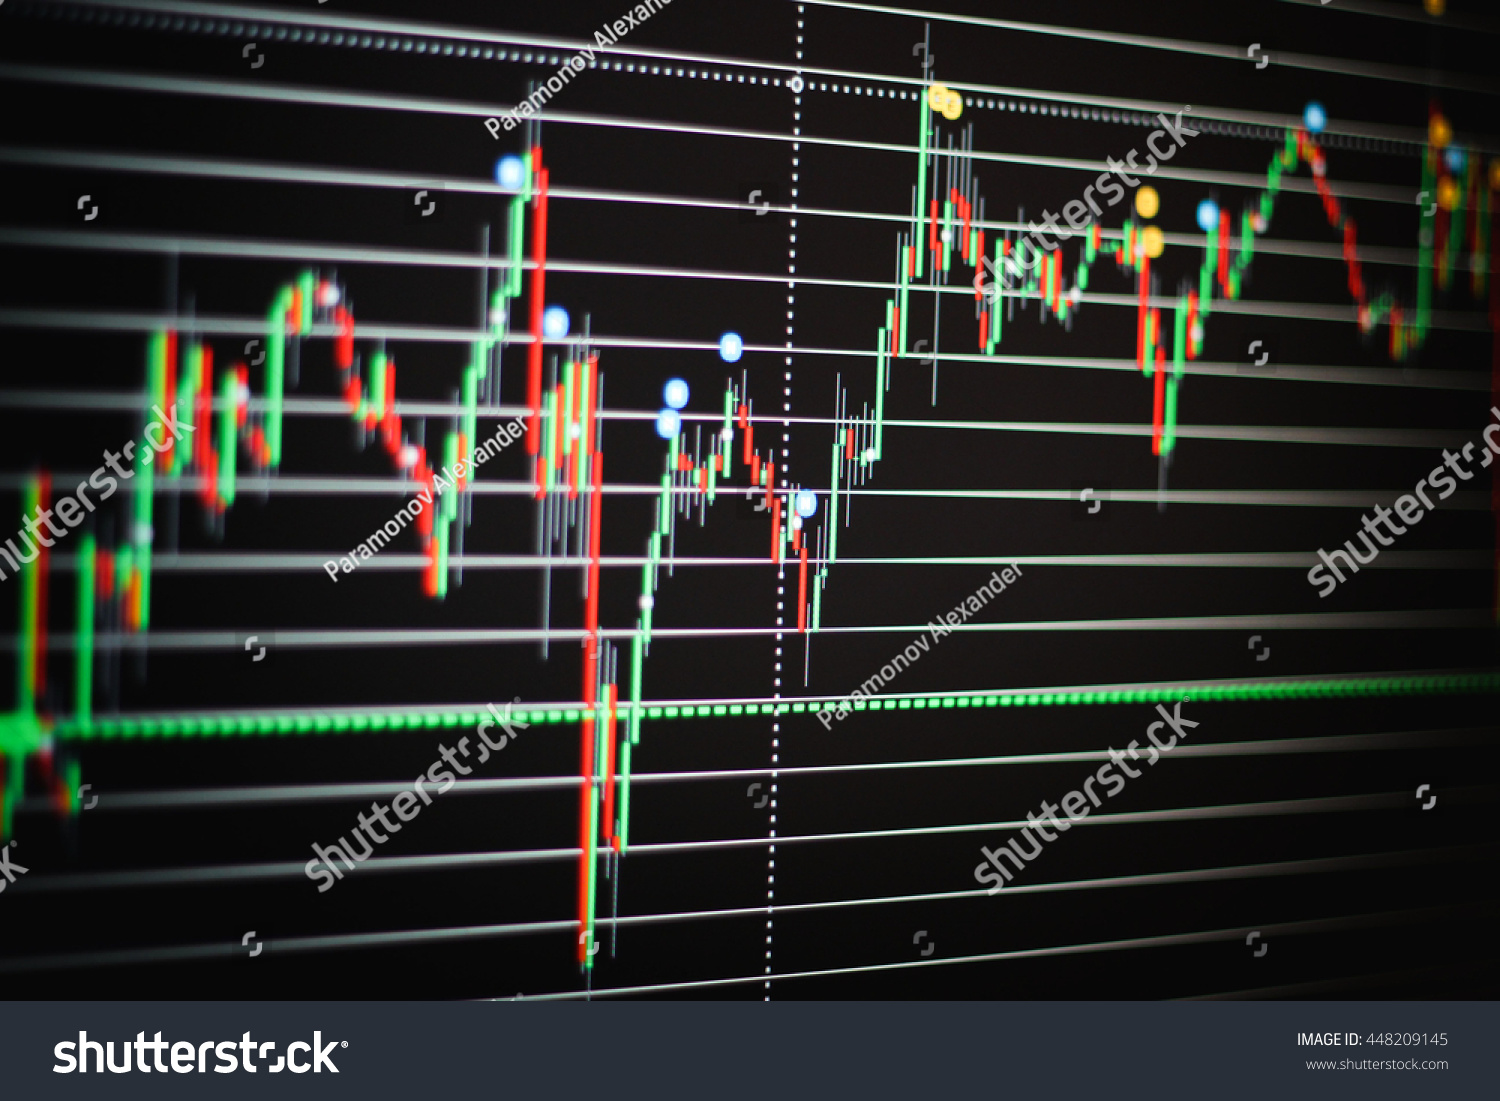 Stock Market Quotes Charts